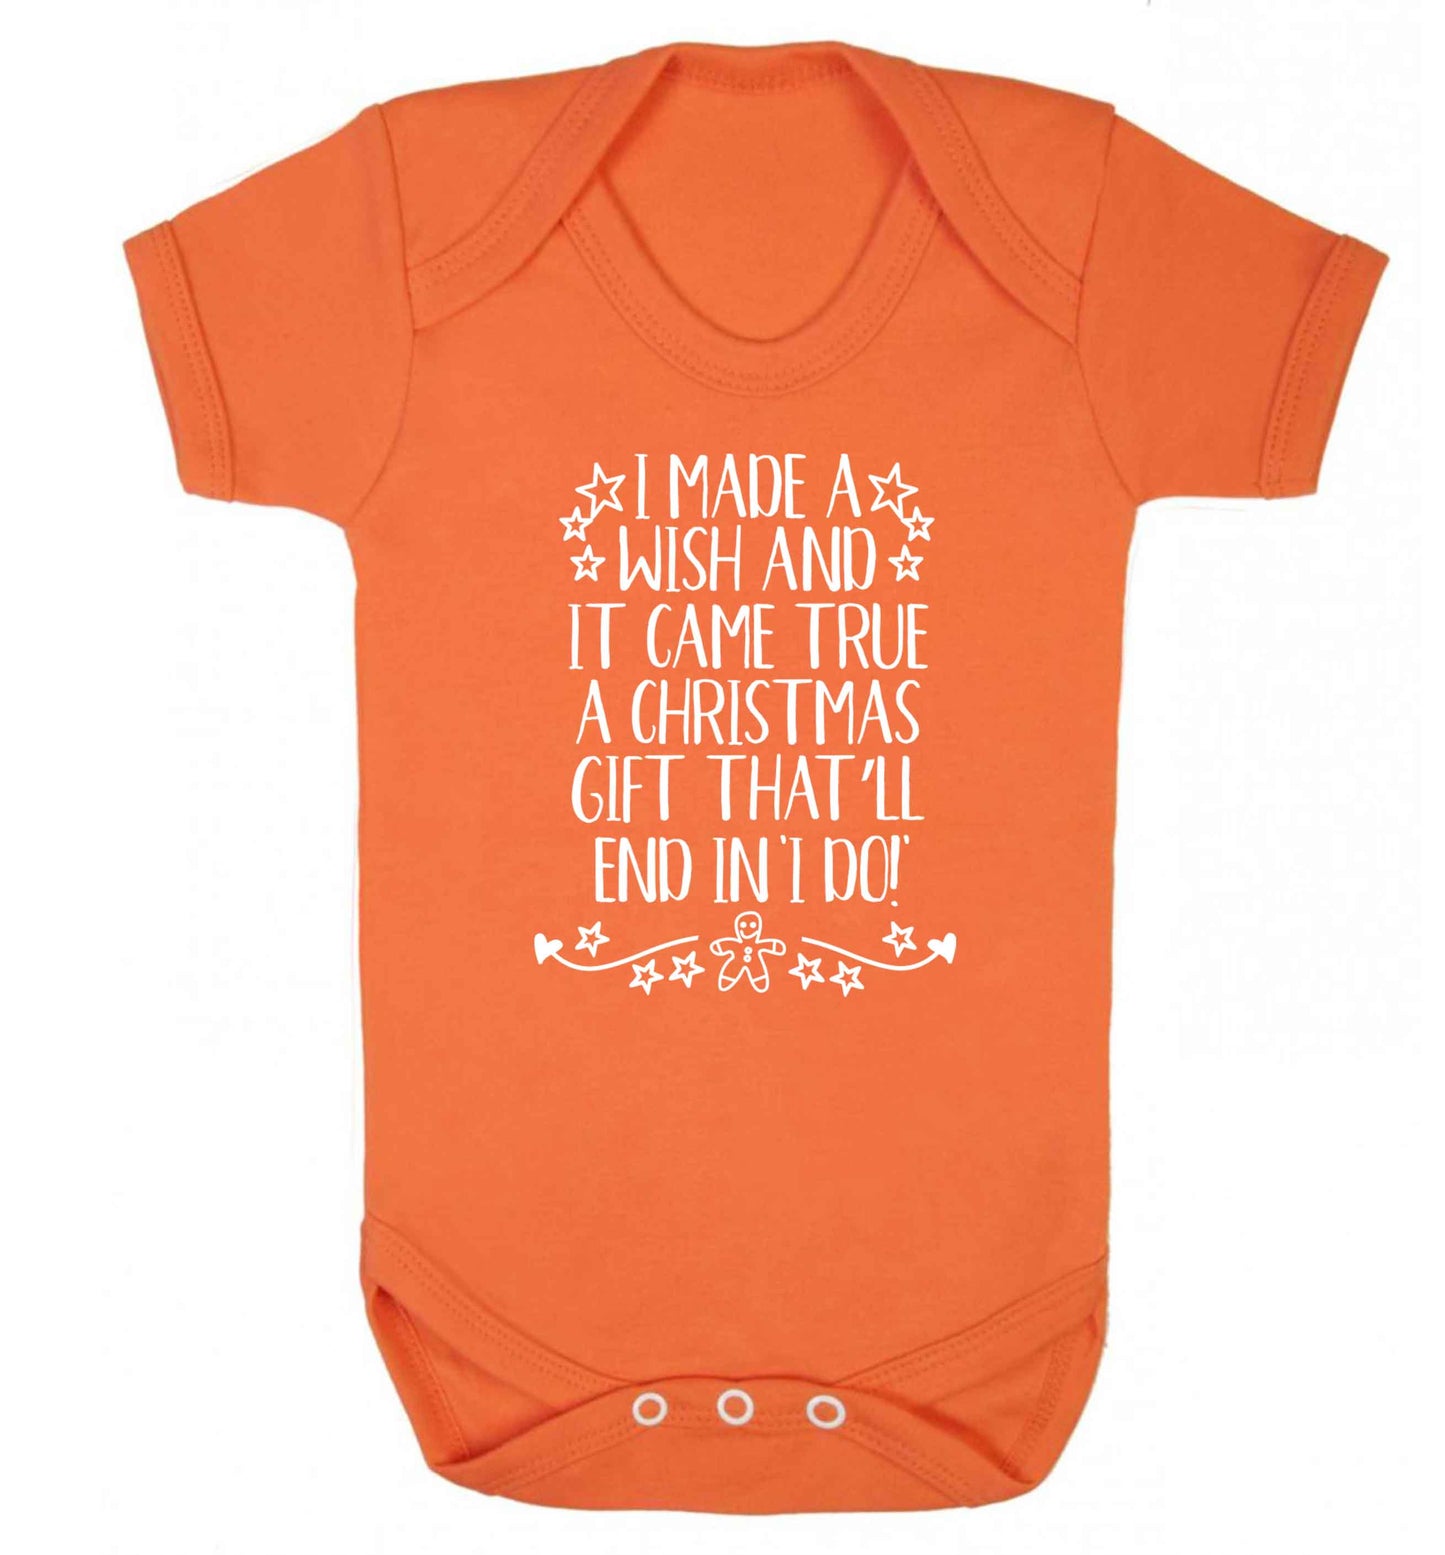 I made a wish and it came true a Christmas gift that'll end in 'I do' Baby Vest orange 18-24 months